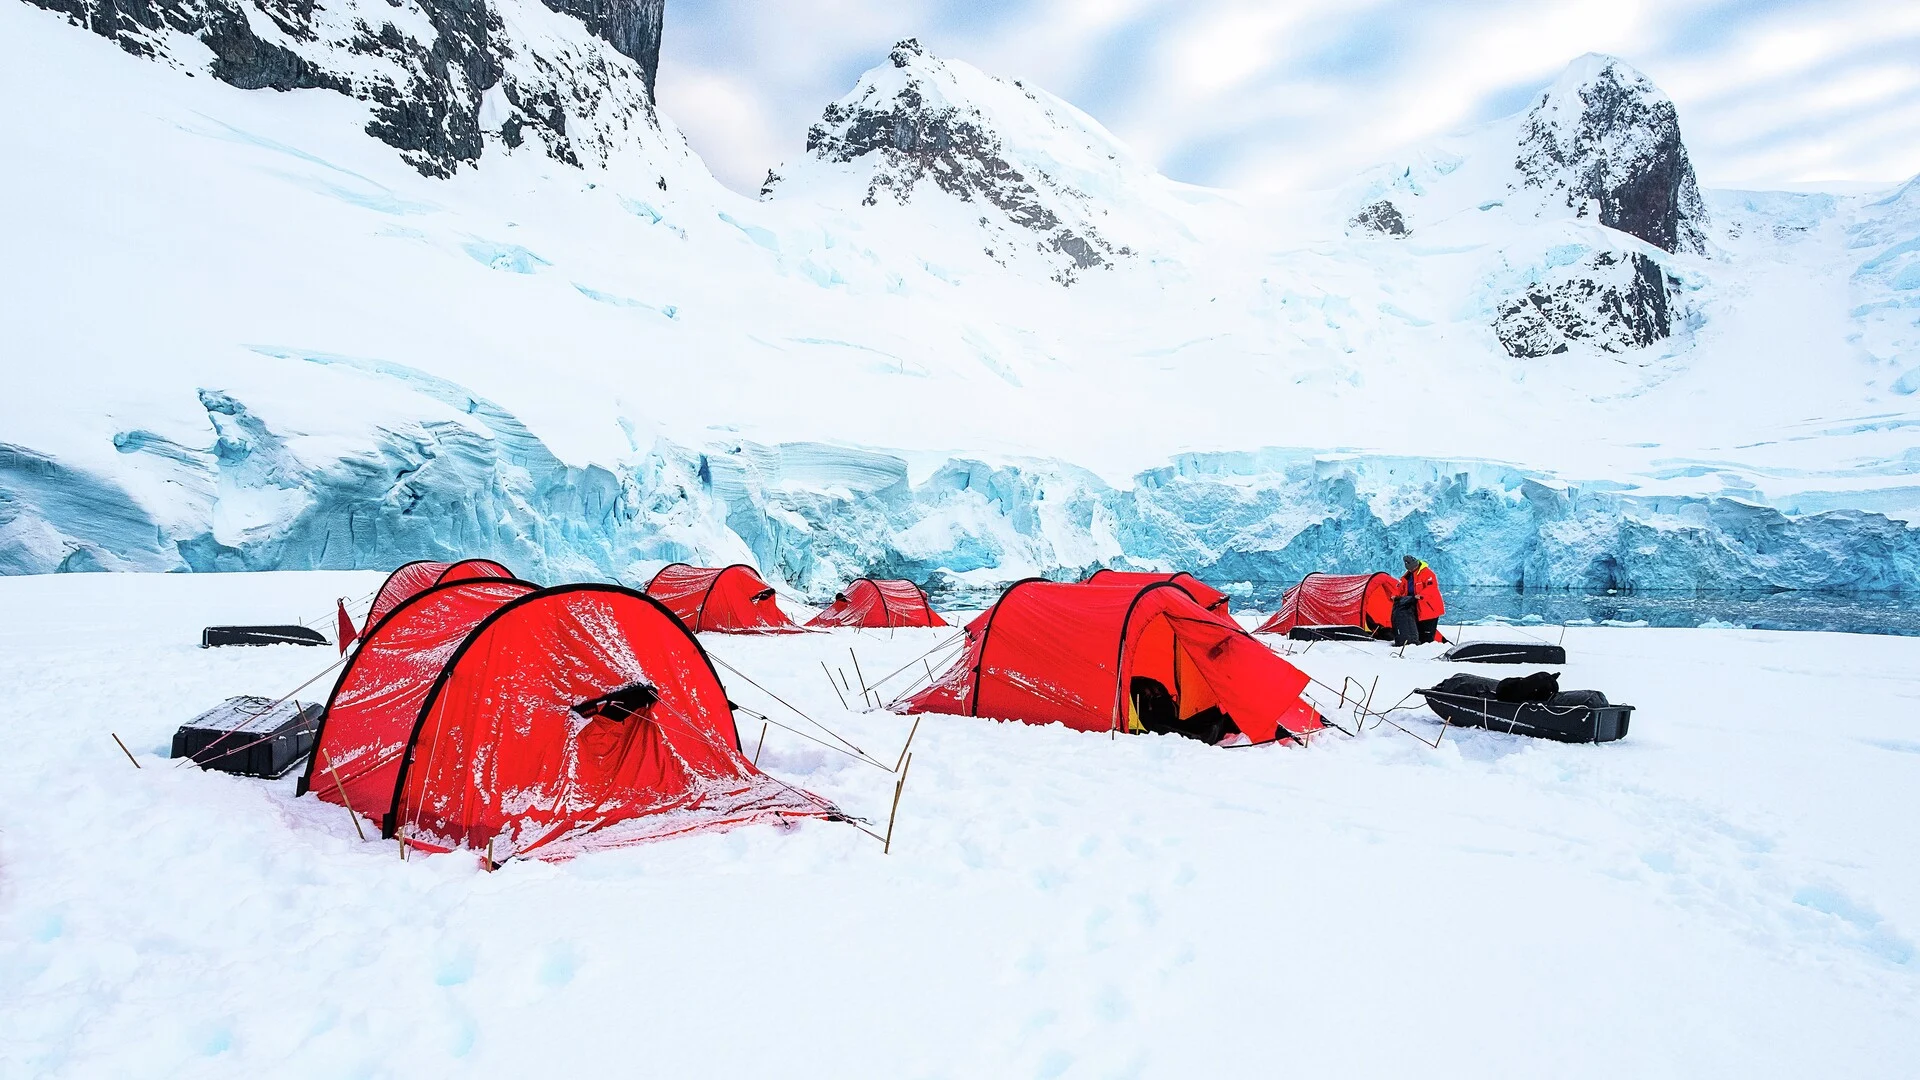 Guests taking part in Amundsen Night (Camping on the Ice) in Antarctica. Photo Credit: Stefan Dall / HX 